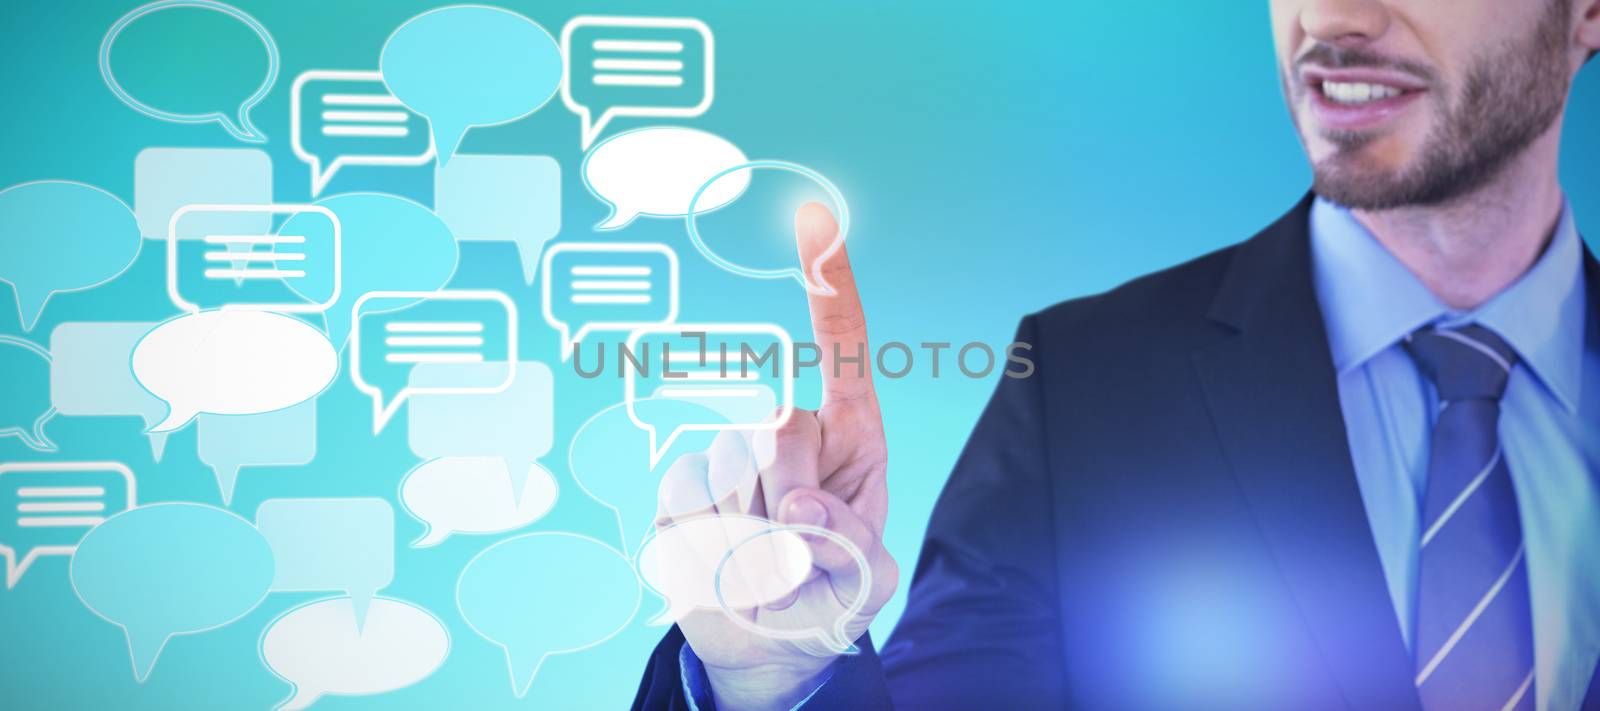 Composite image of mid section of smiling businessman touching invisible screen by Wavebreakmedia